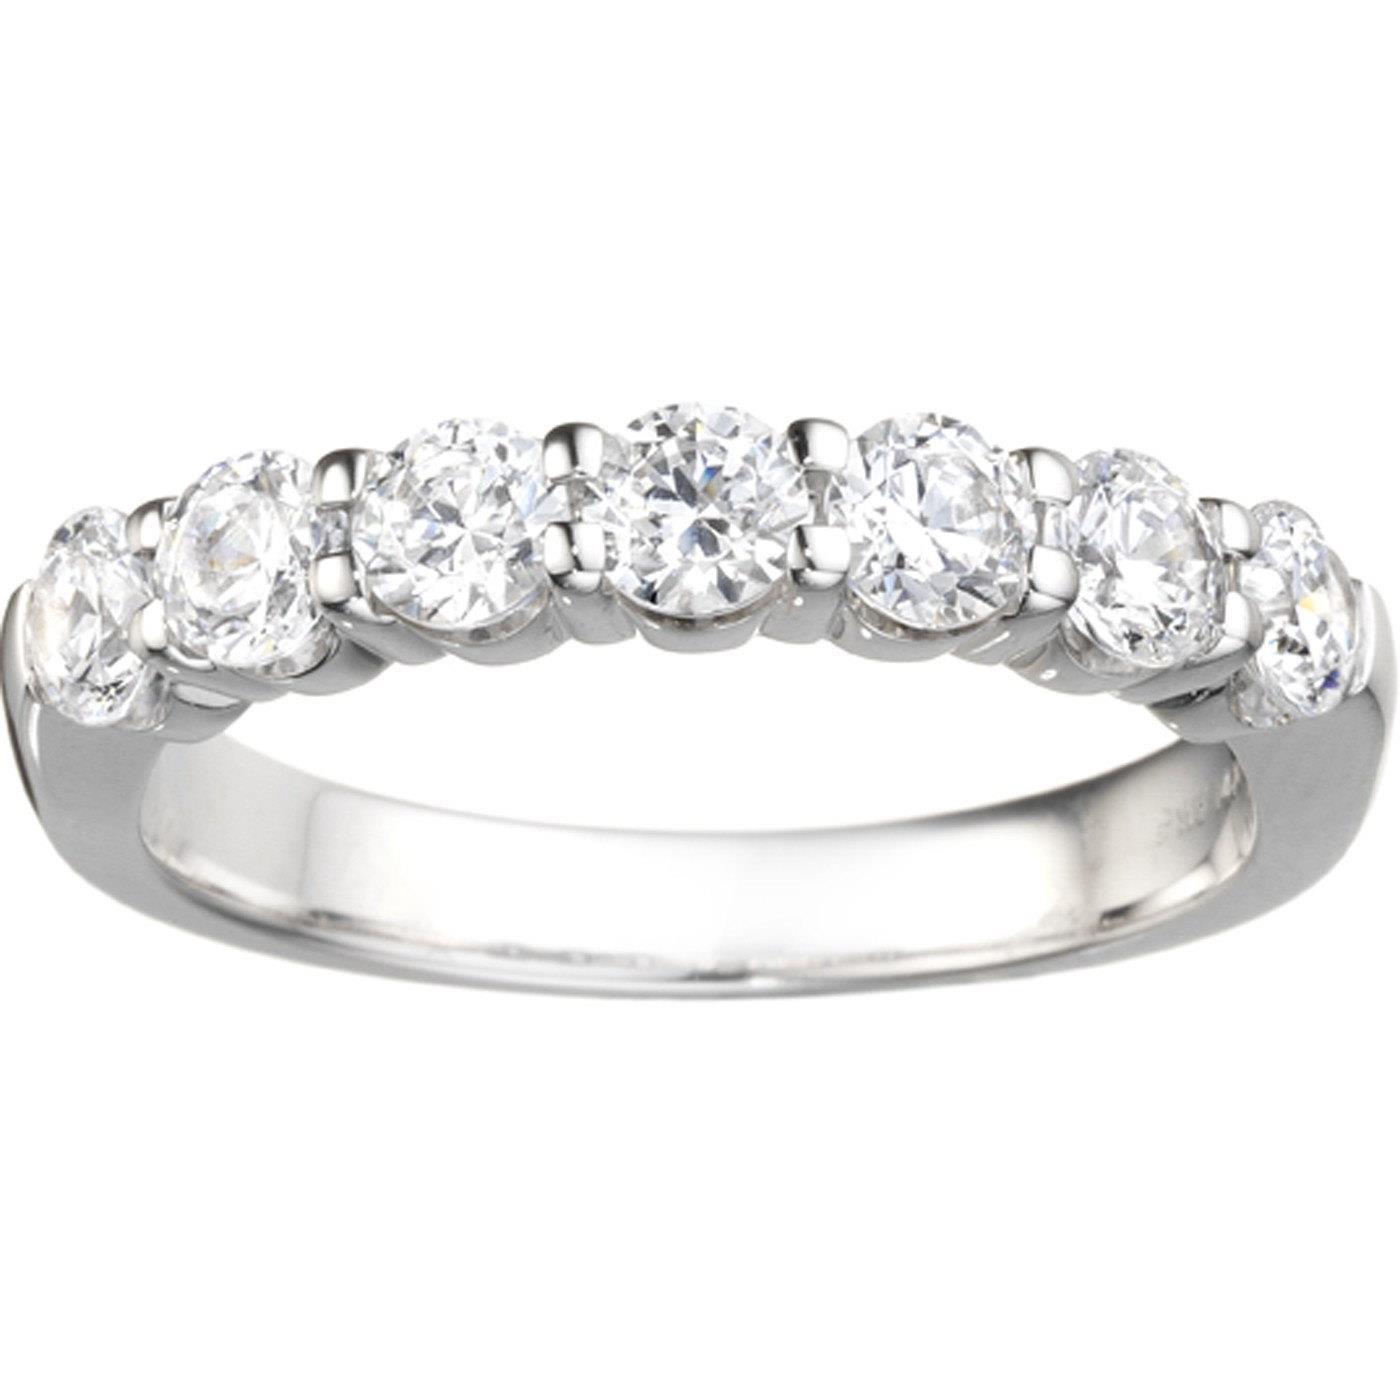 Comfort Fit Round Real Diamond Wedding Band 1.75 Carats 14K White Gold